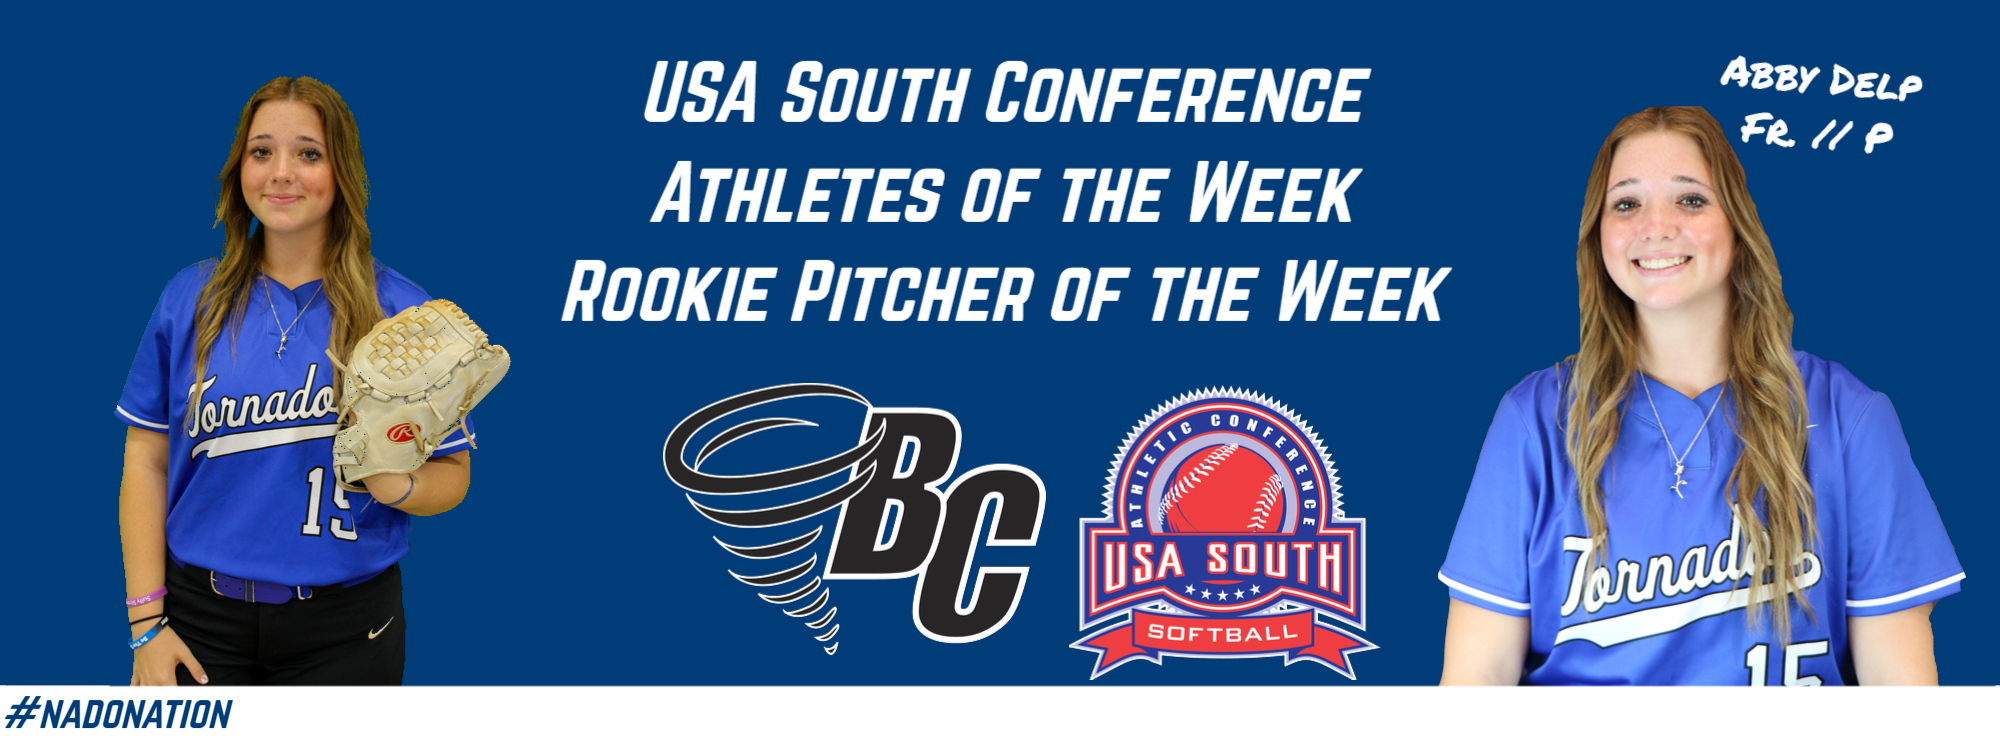 Delp Earns Rookie Pitcher of the Week Nod After Complete-Game Collegiate Debut